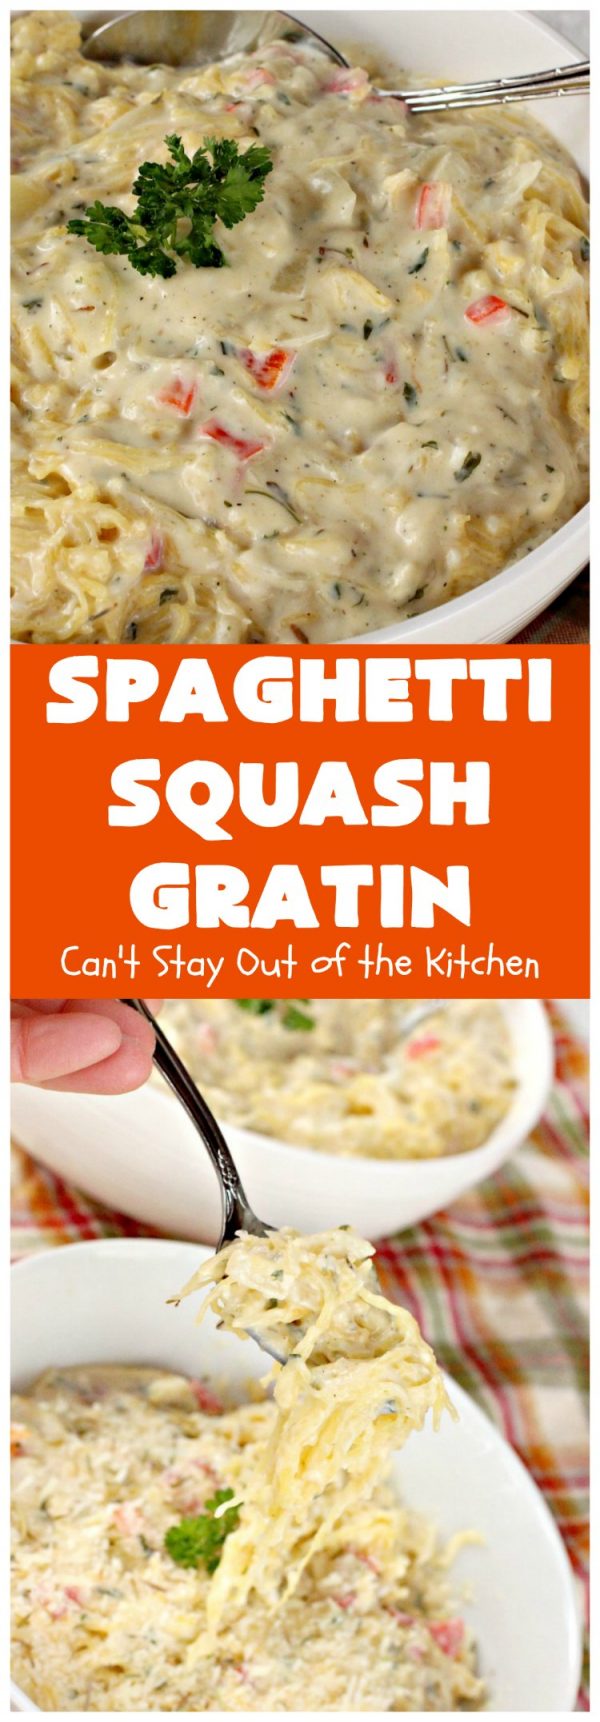 Spaghetti Squash Gratin – Can't Stay Out of the Kitchen